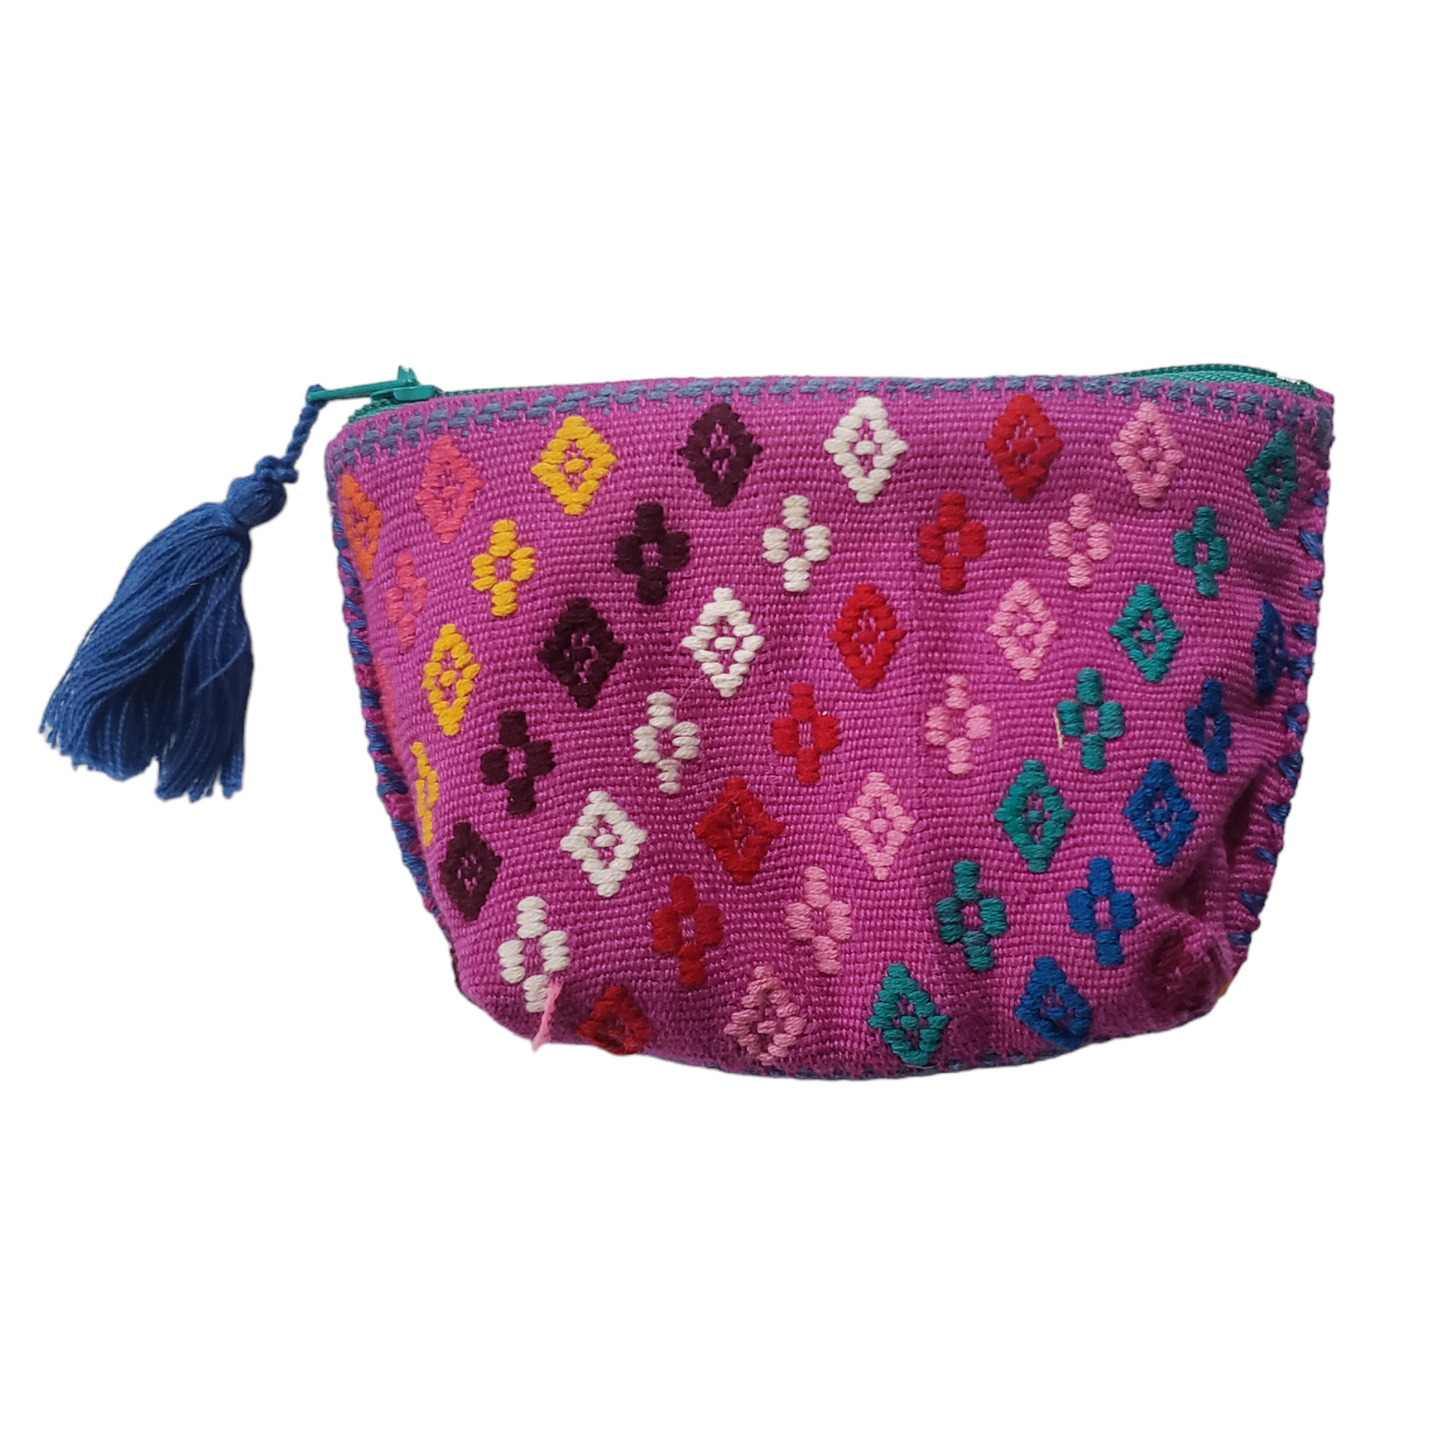 Embroidered Pouch from Chiapas Mexico